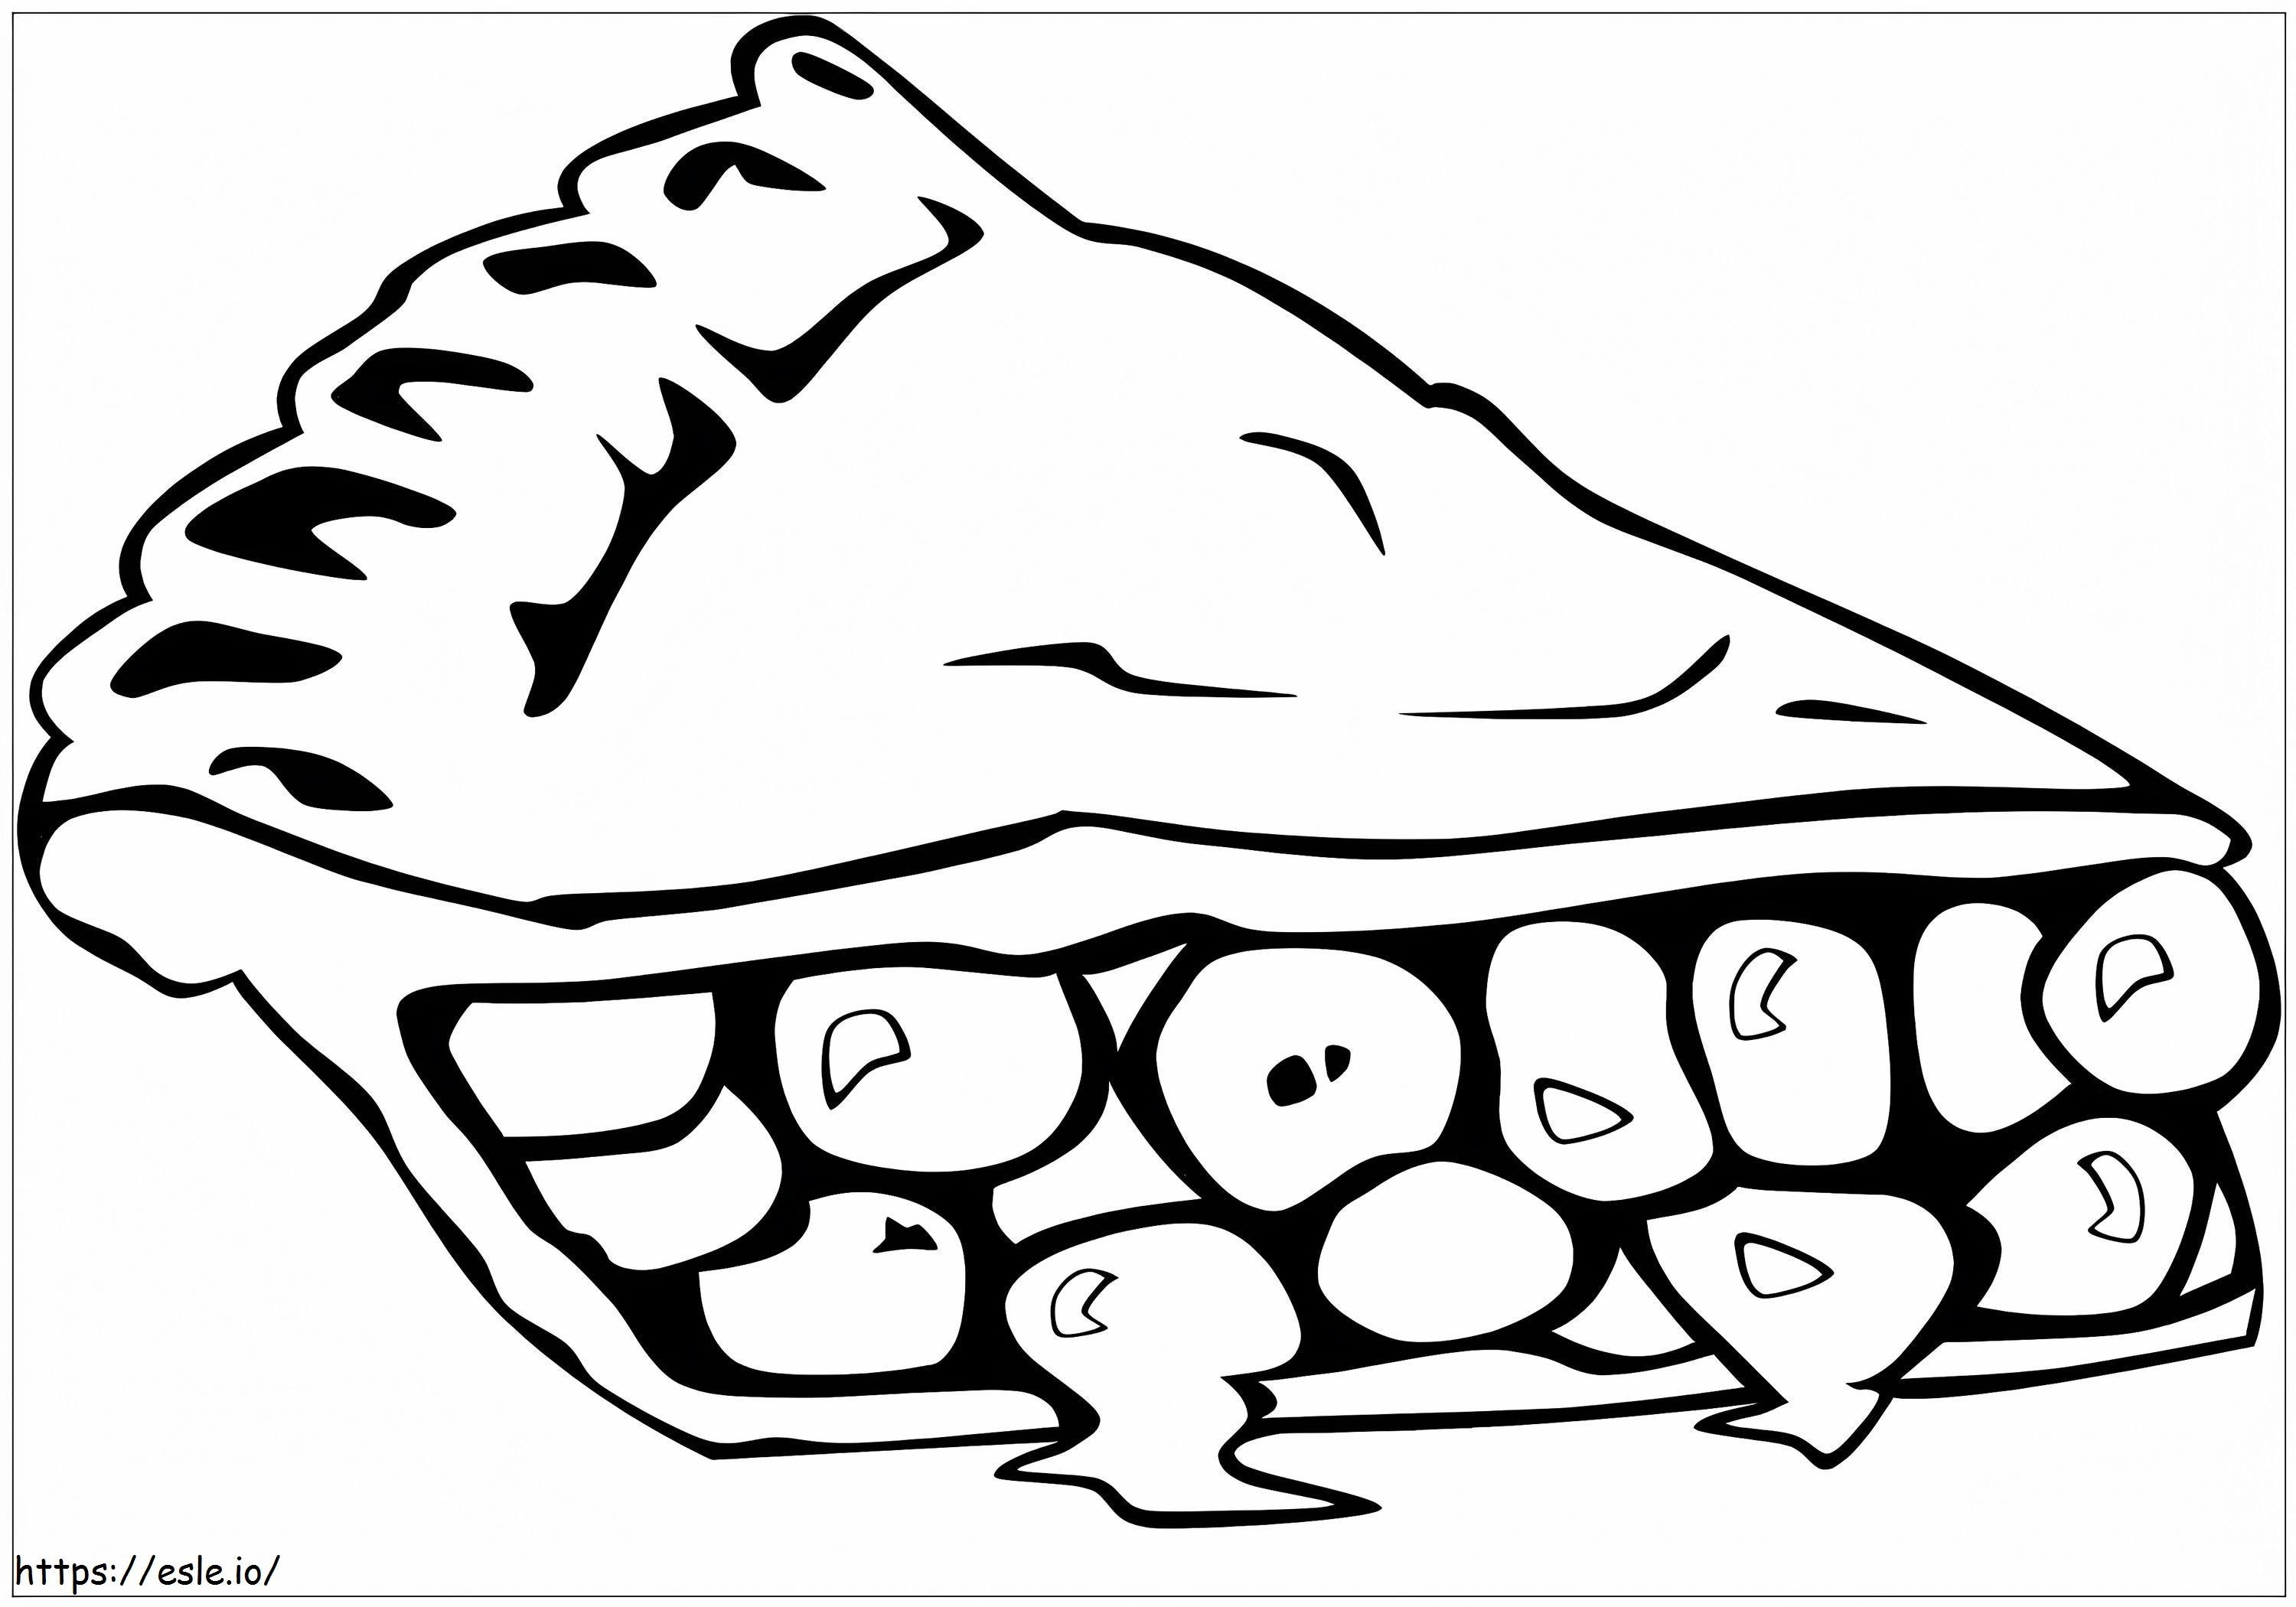 Cherry Pie coloring page